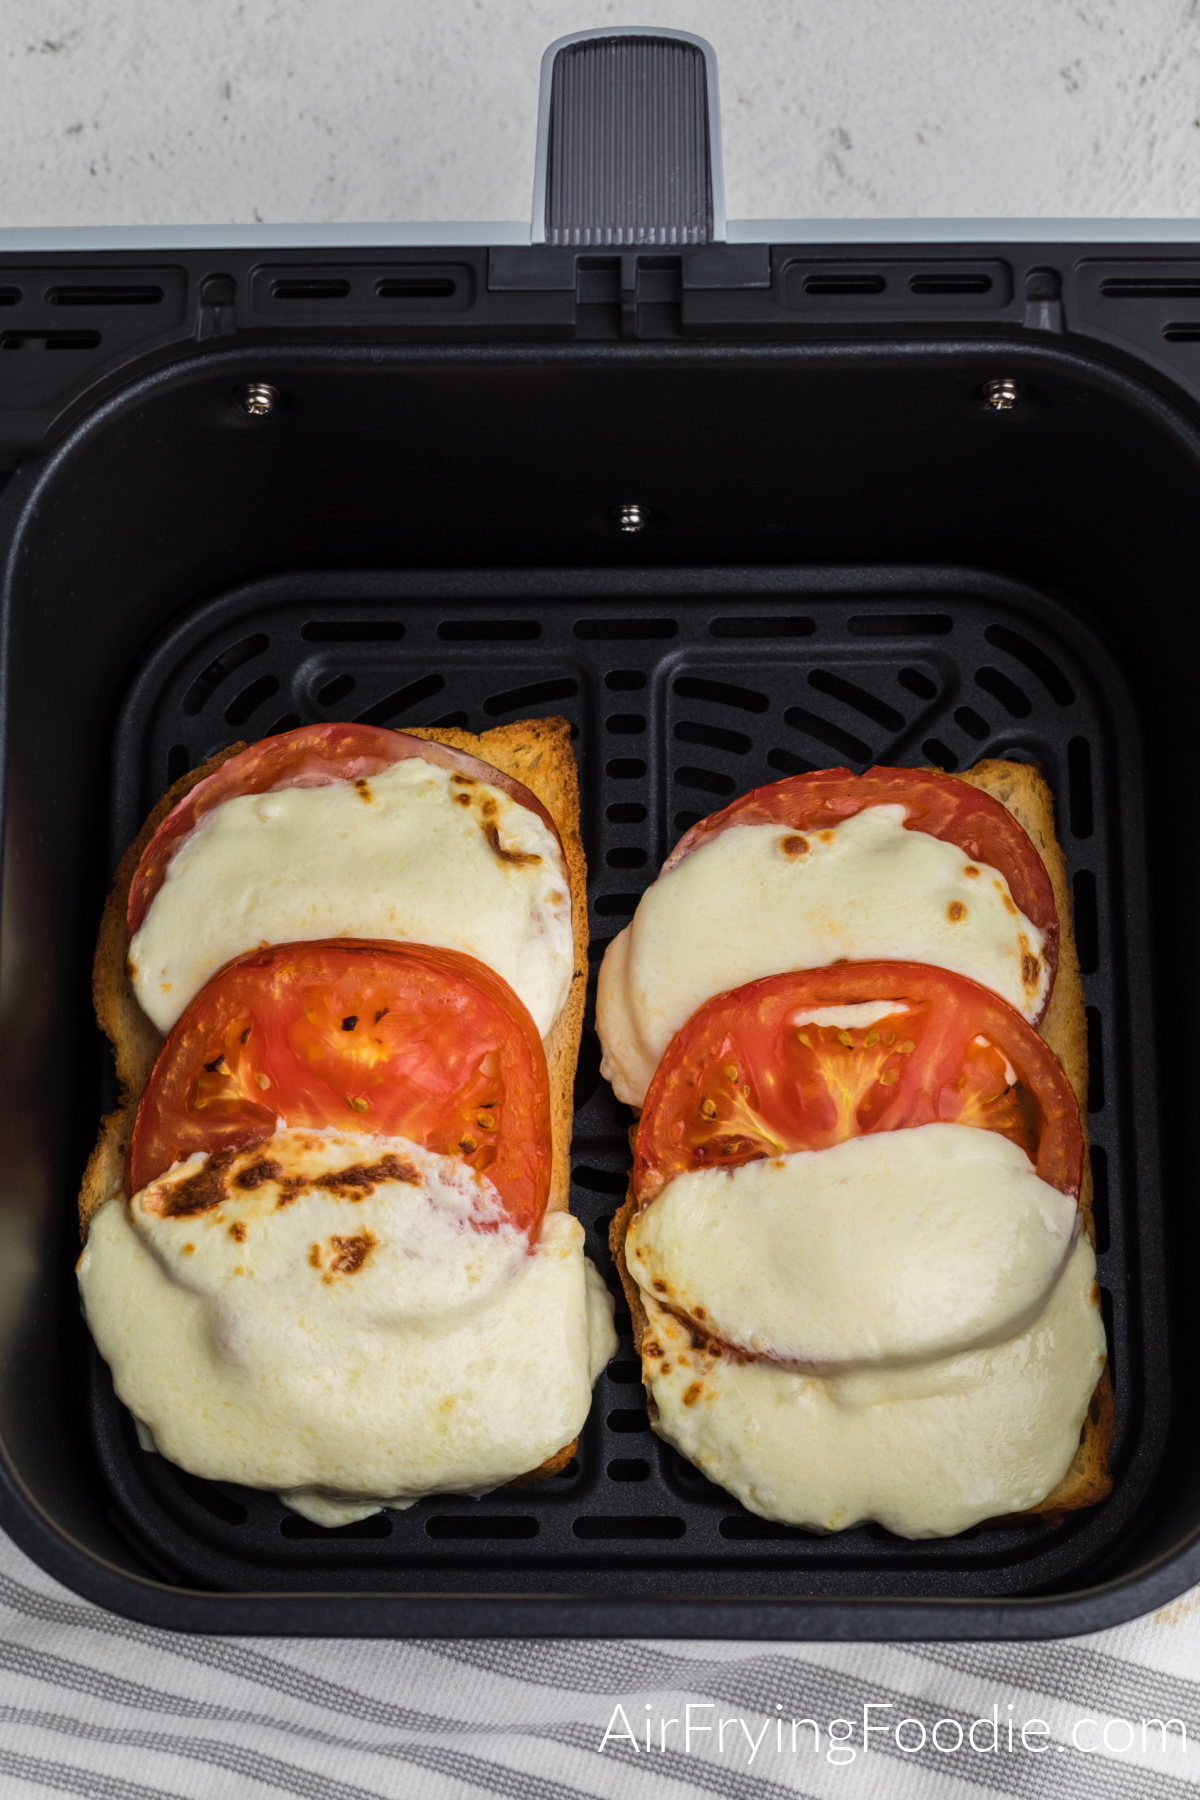 Tomato and grilled mozzarella cheese on buttered bread, air fried and in the basket of the air fryer.